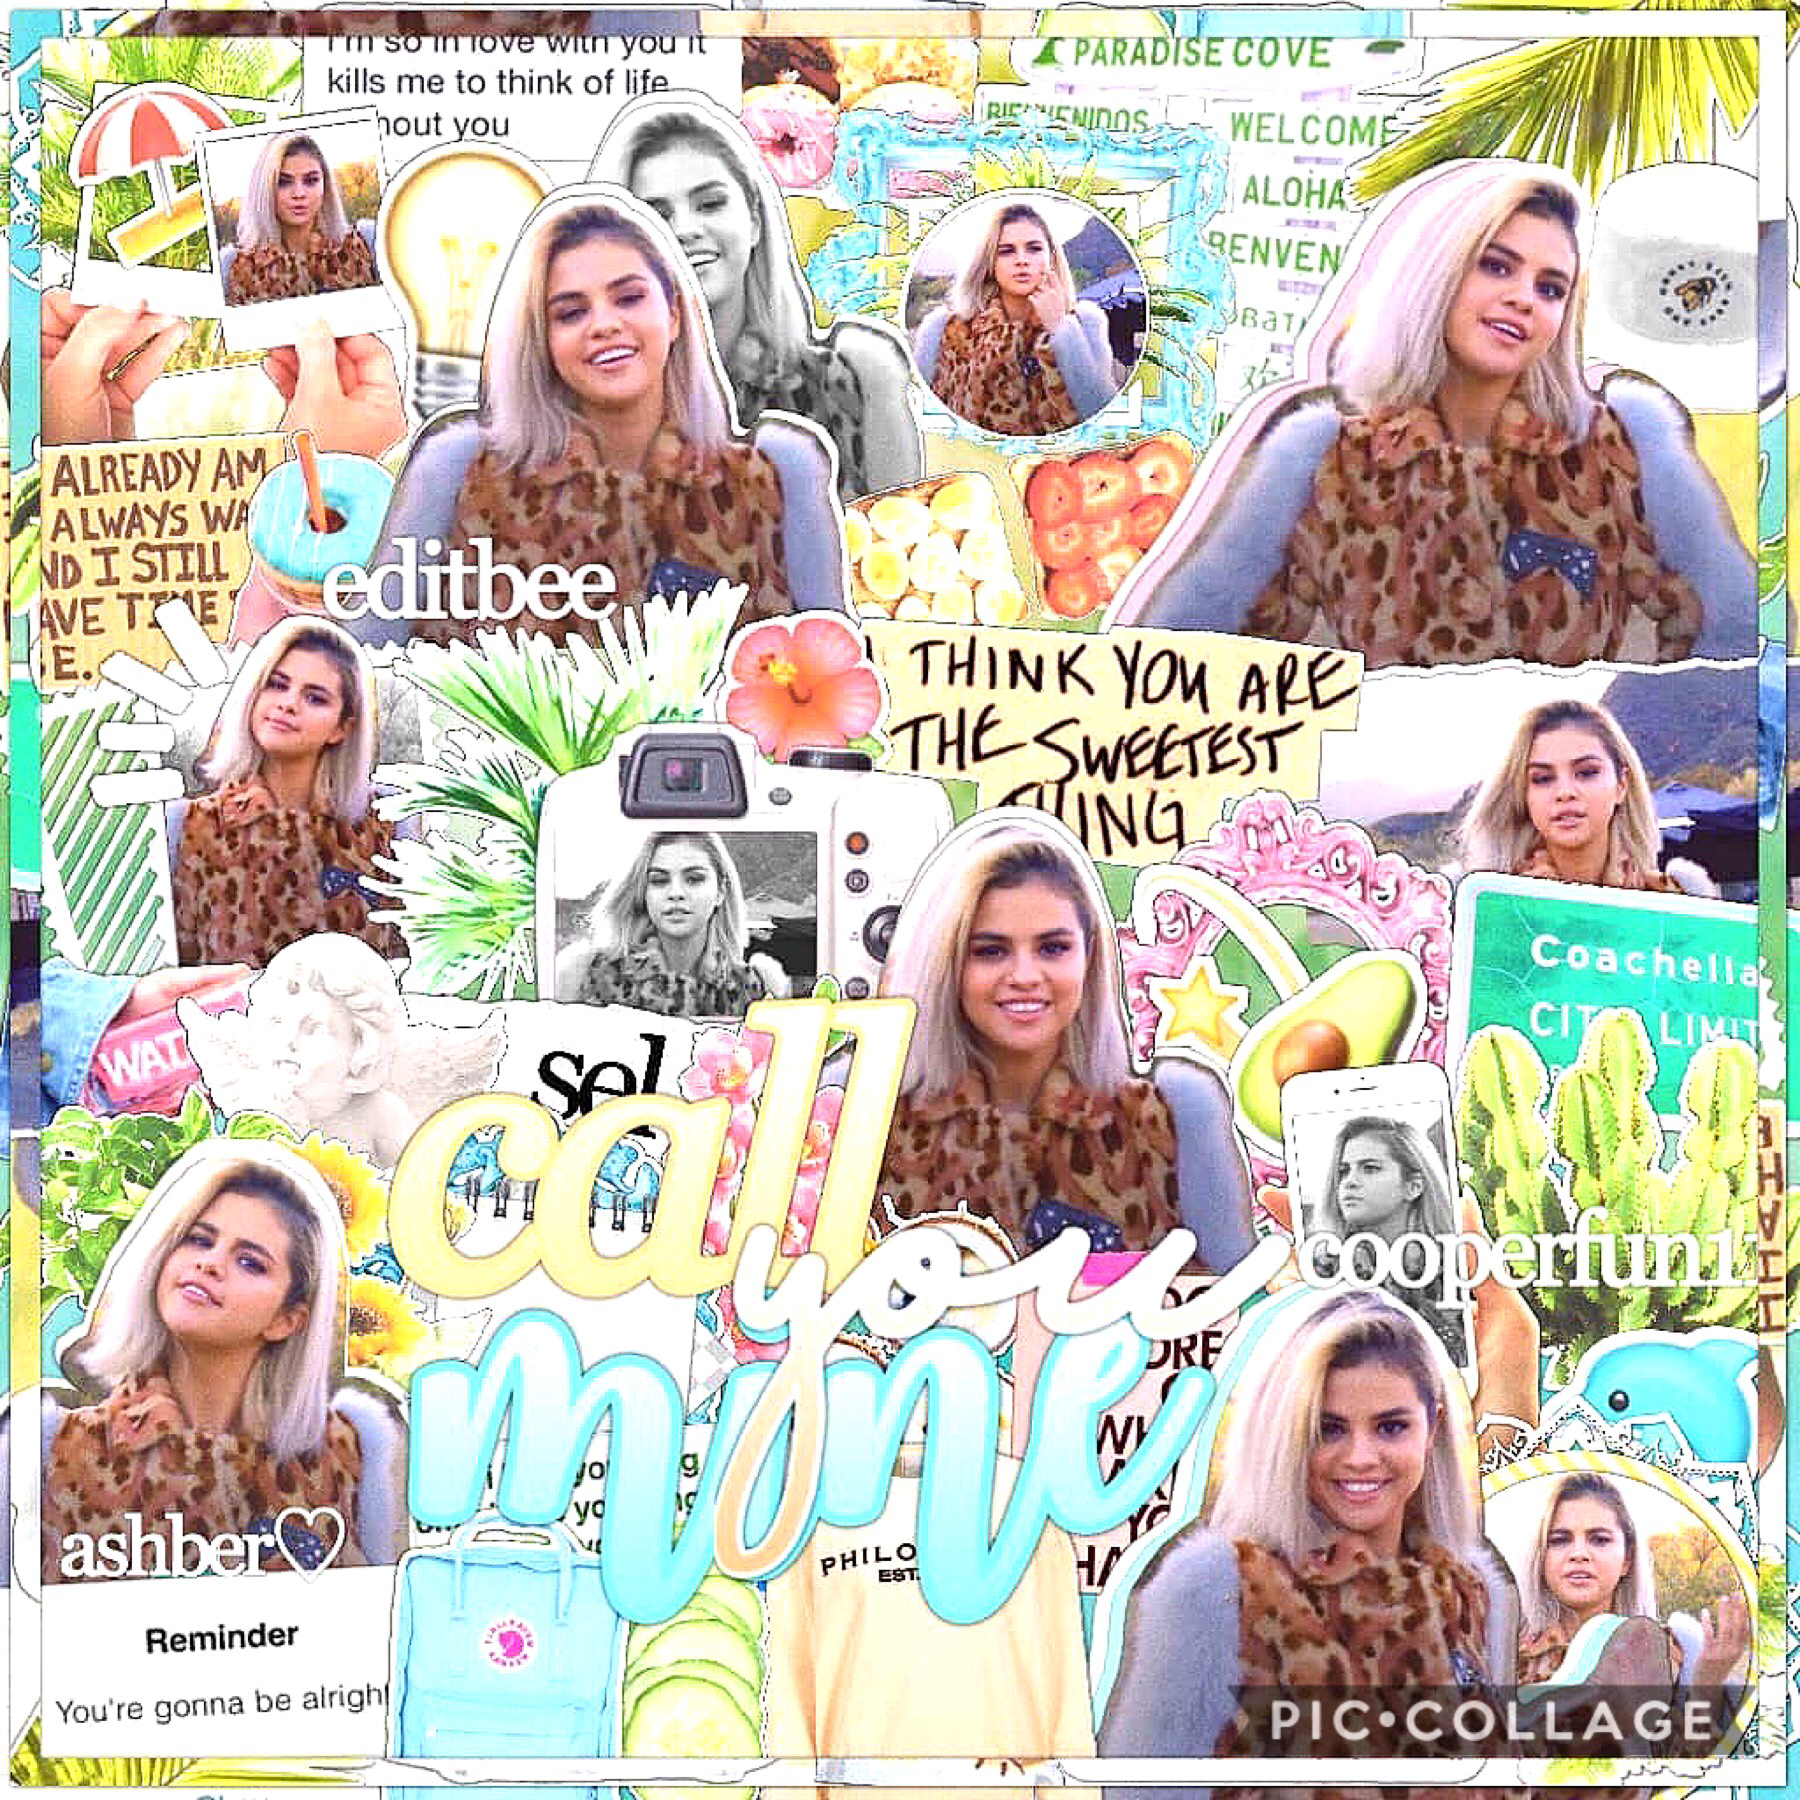 heyyy ! 🌺 ashber collab😍🌤 follow her @Cooperfun11 because she's amazing! 🌿 
spam: @editbeespam whi: @editbee